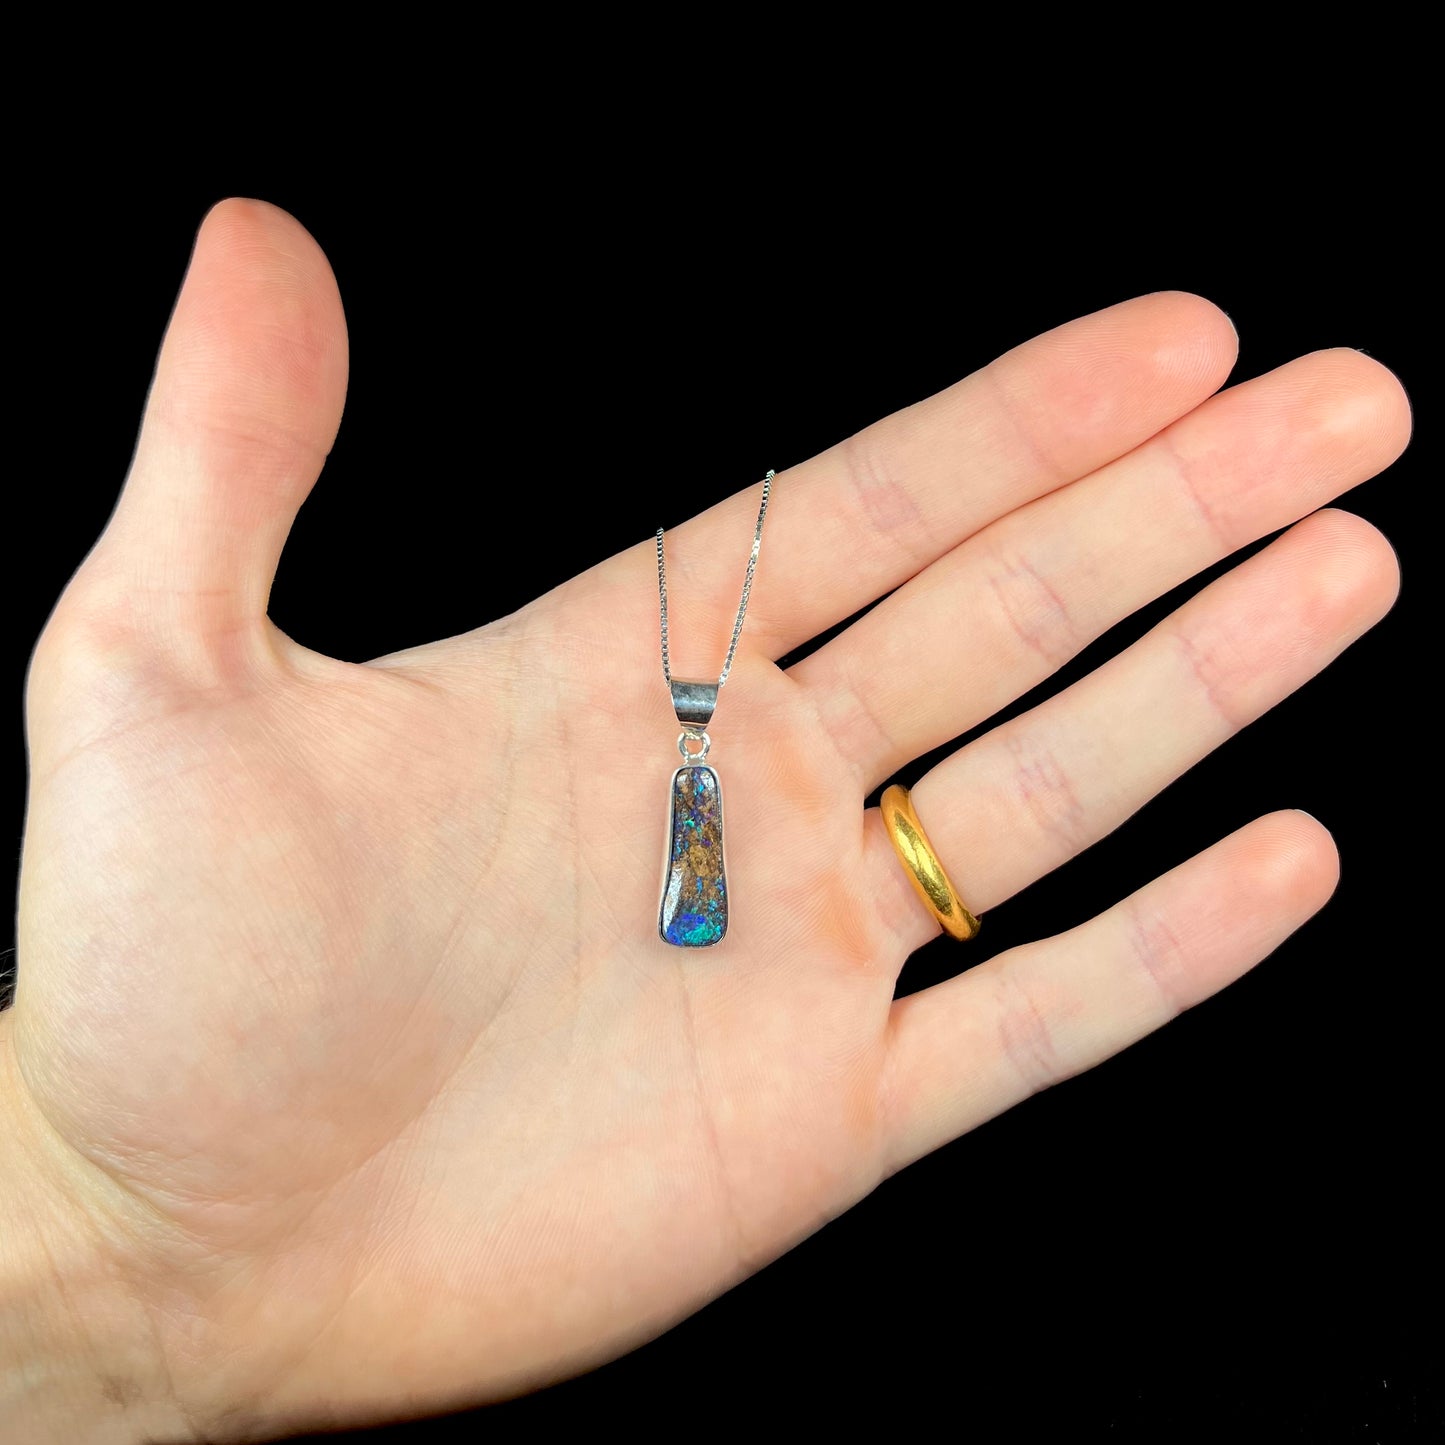 A sterling silver necklace bezel set with a natural Australian boulder opal stone.  The stone shines colors of blue, green, and purple.